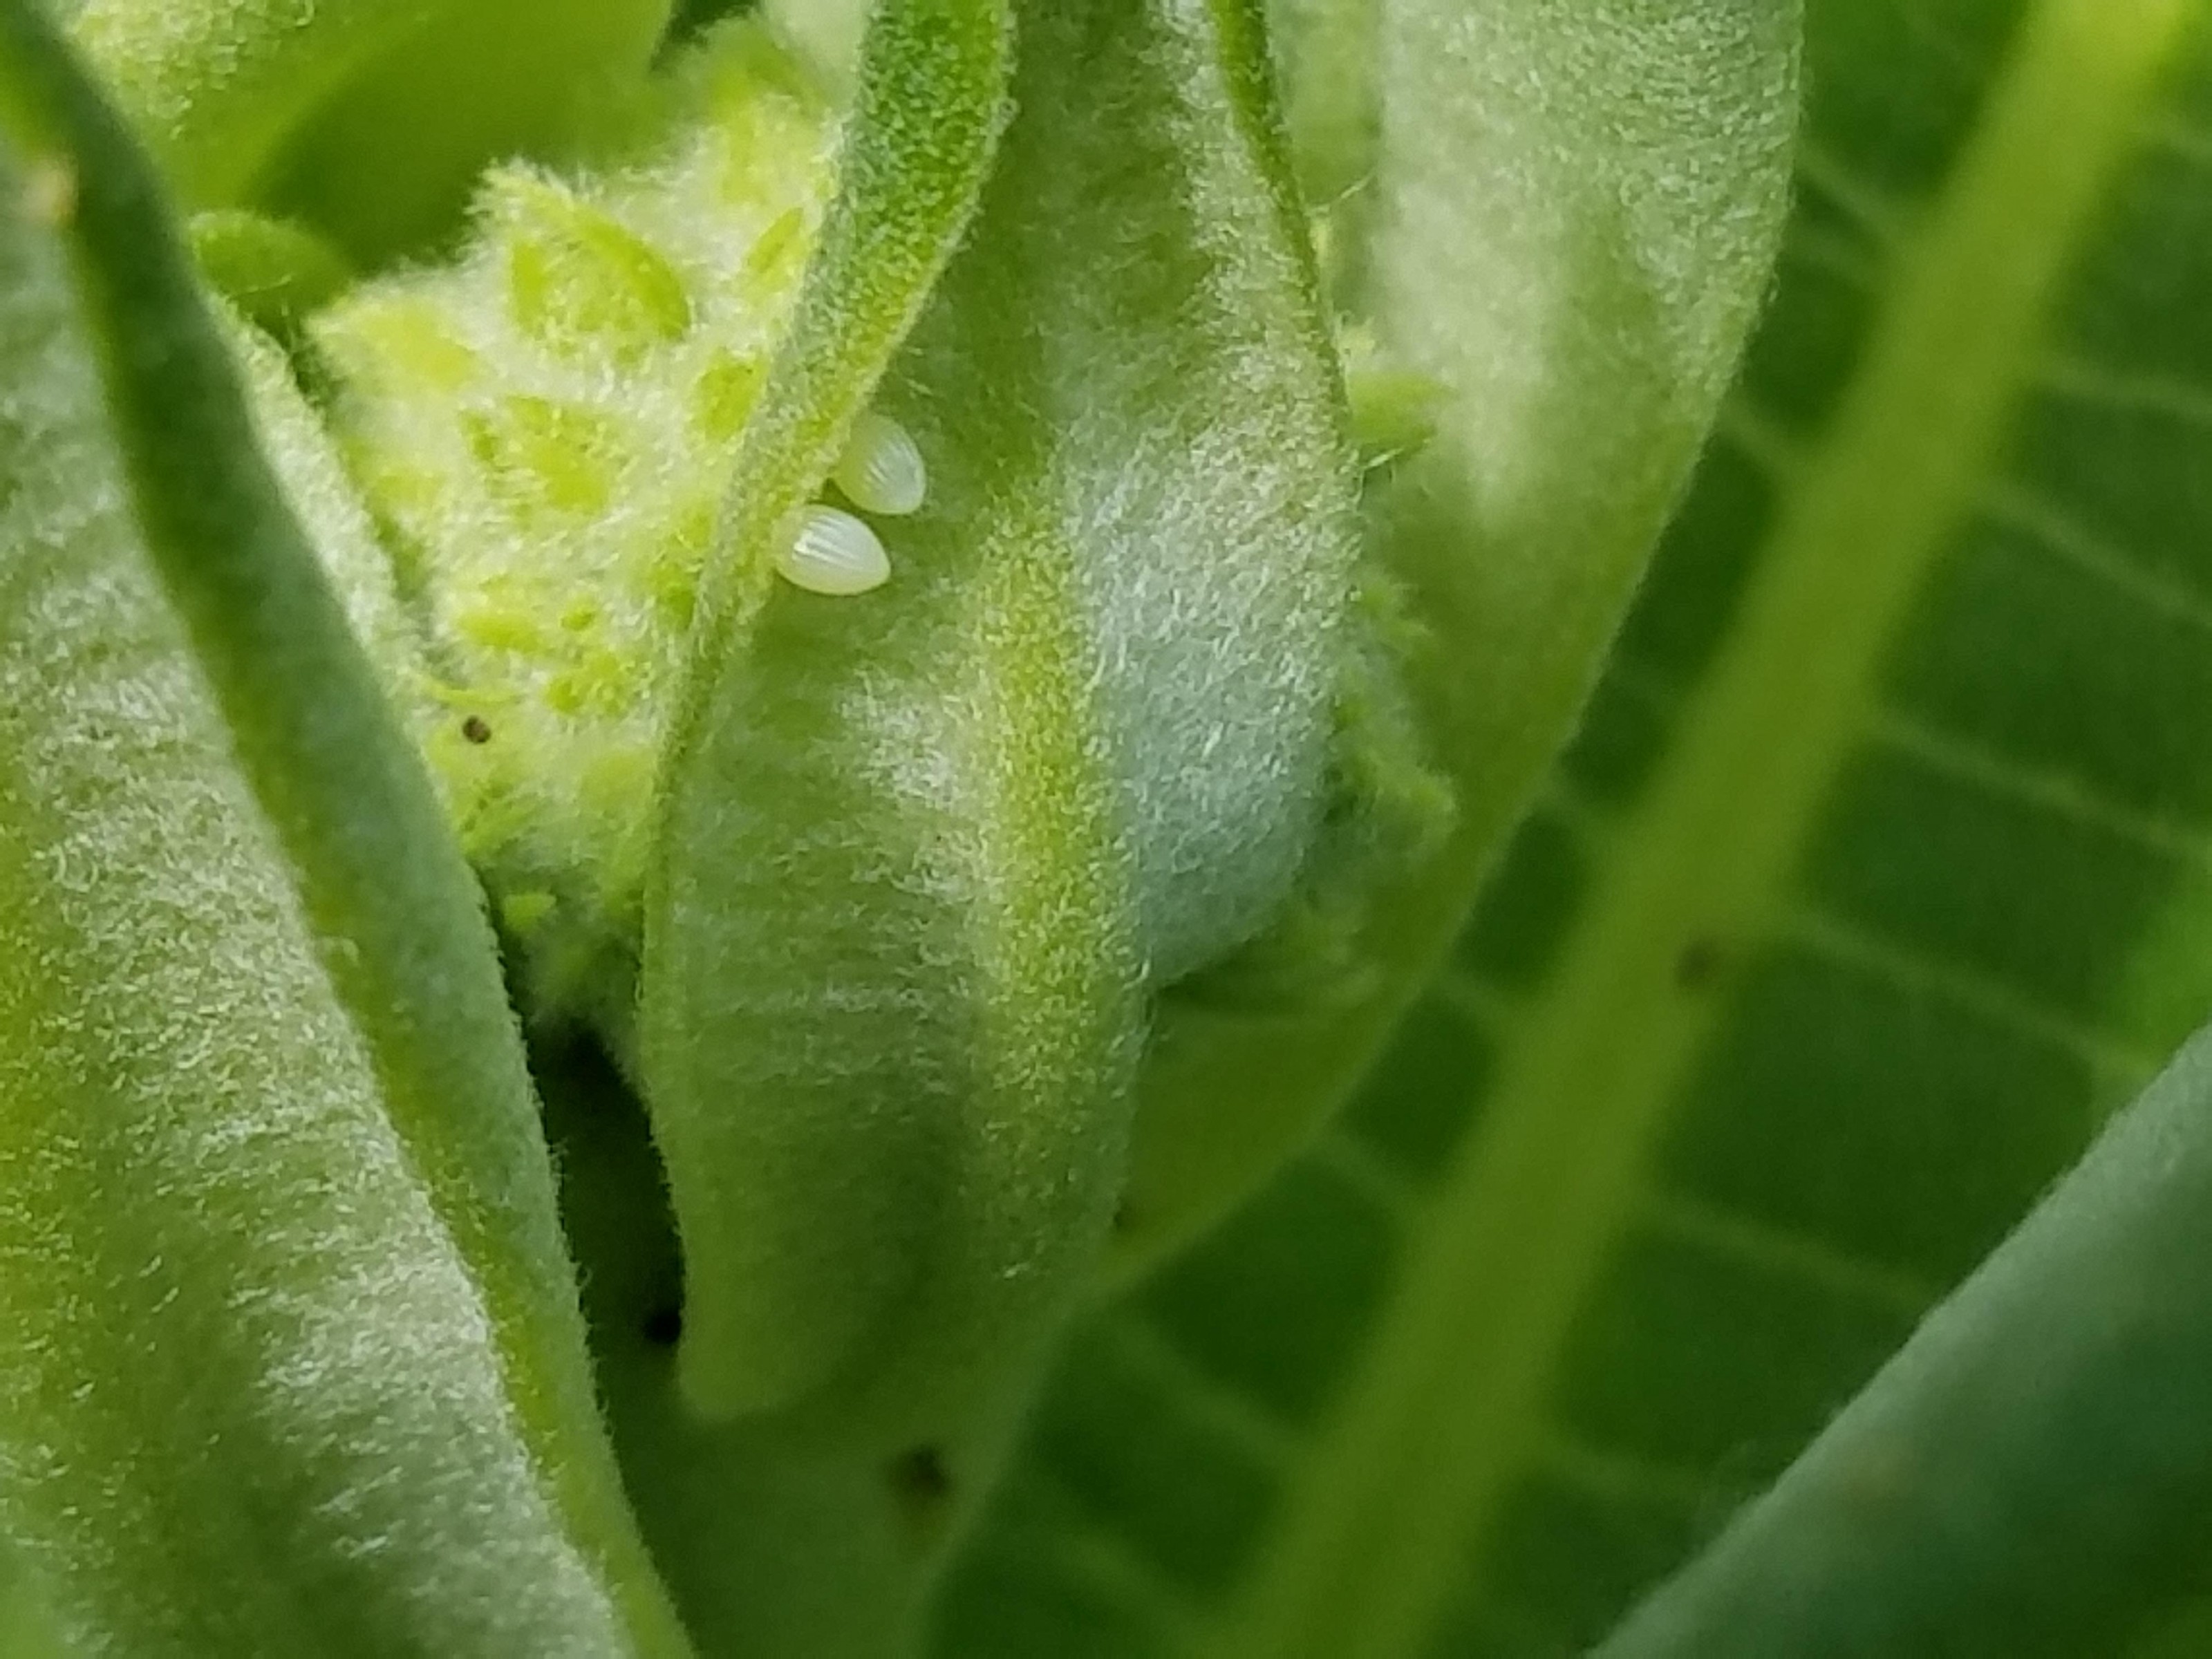 Monarch Butterfly Eggs in Ontario